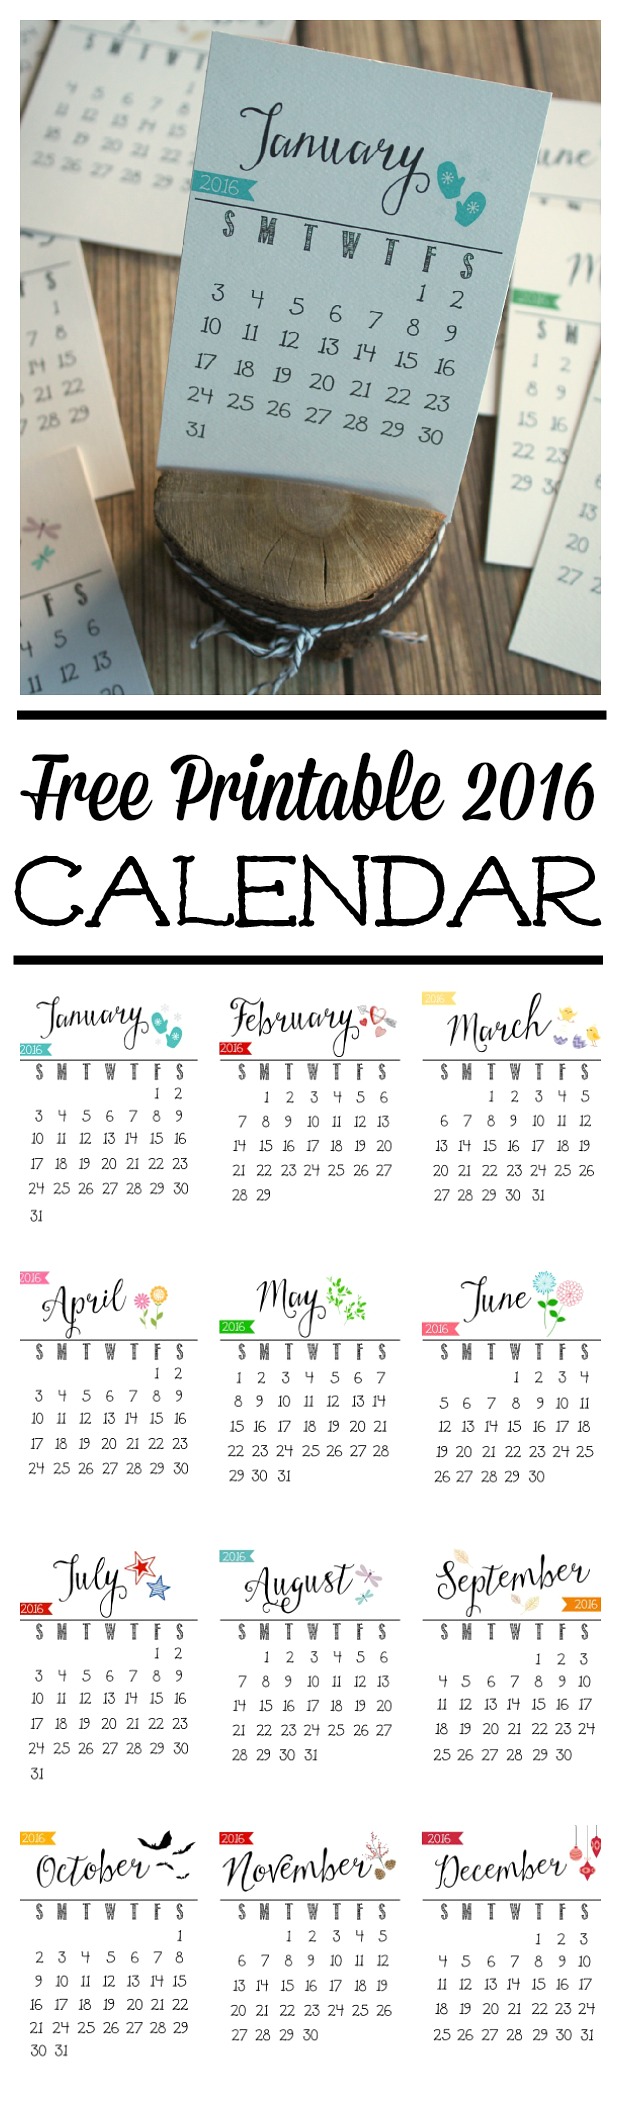 Printable Calendar 2016 Template from www.cleanandscentsible.com